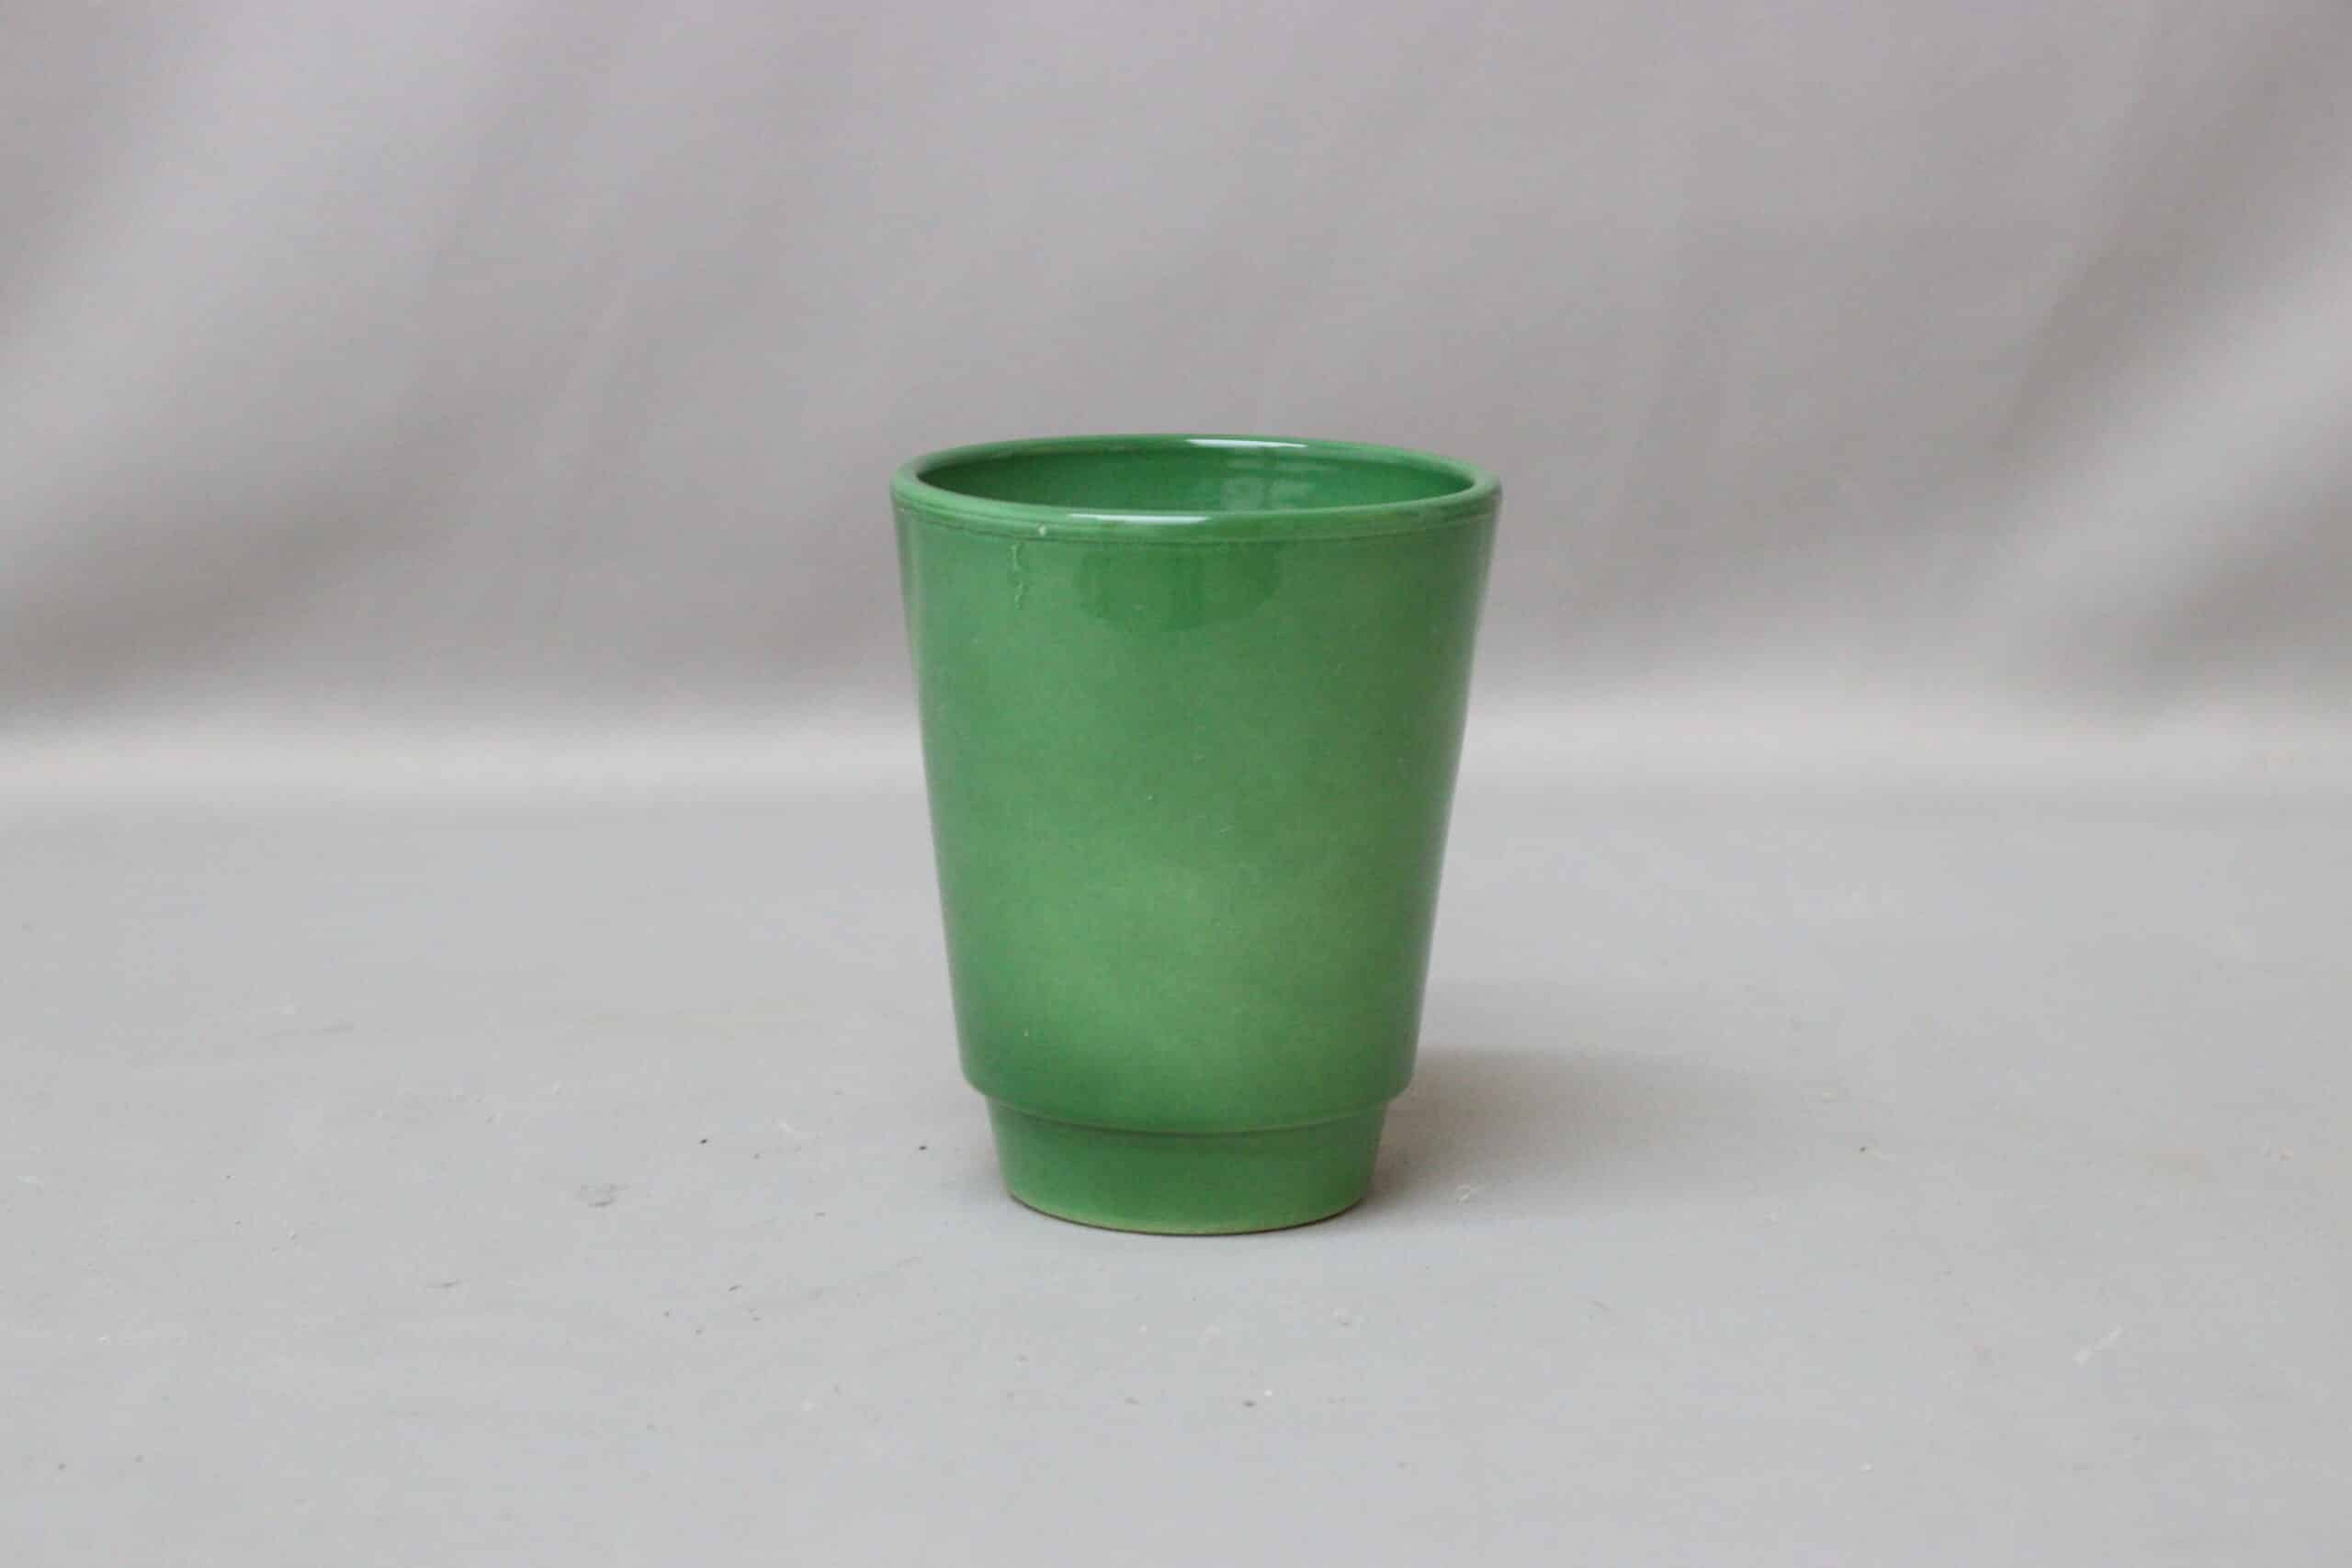 Bright green ceramic pot cover for potted plants.